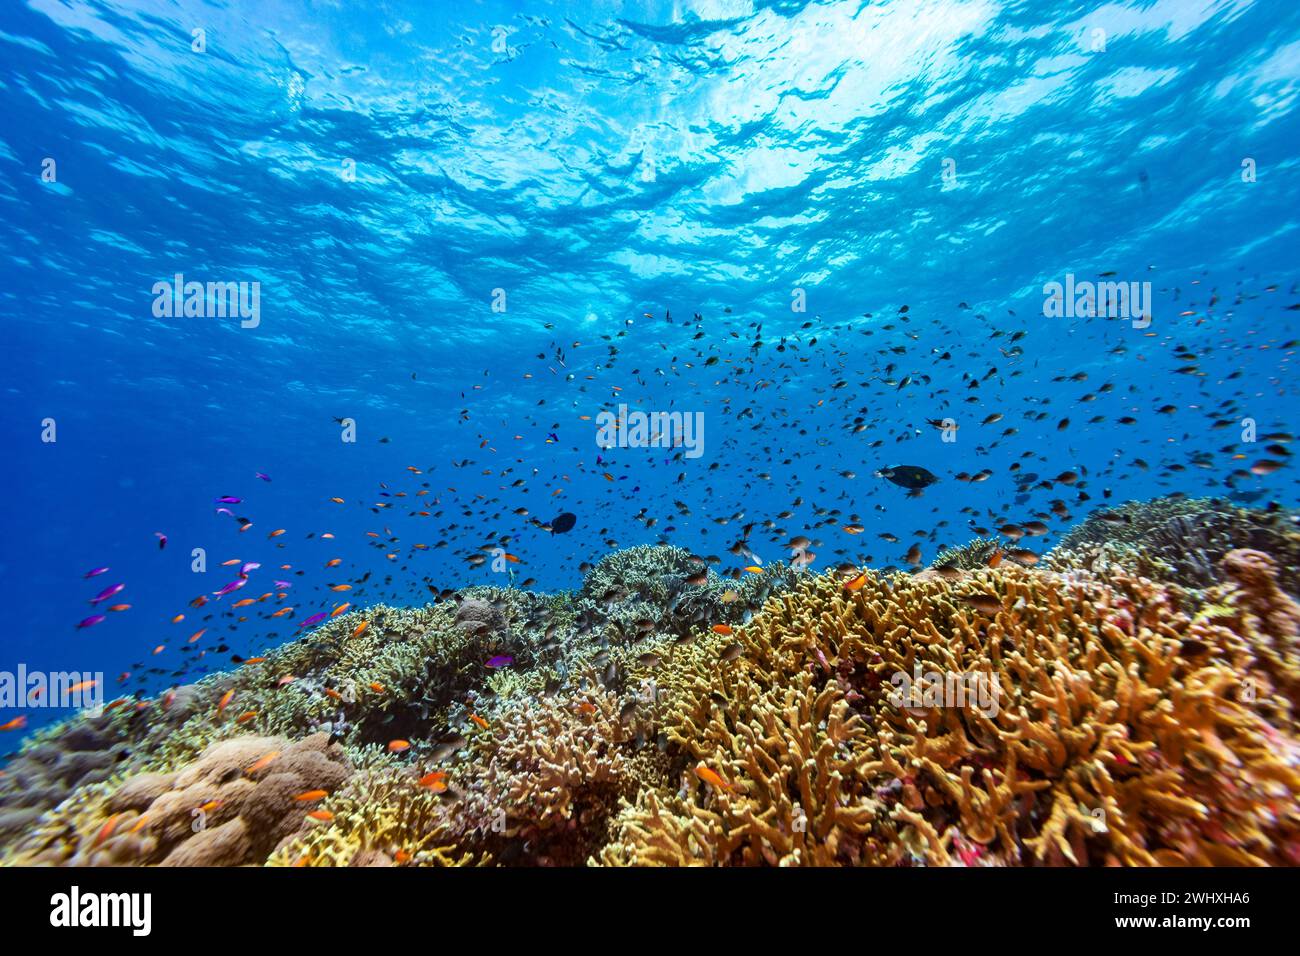 Tropical reef Coral landscape with many colorful schools of fish Stock Photo